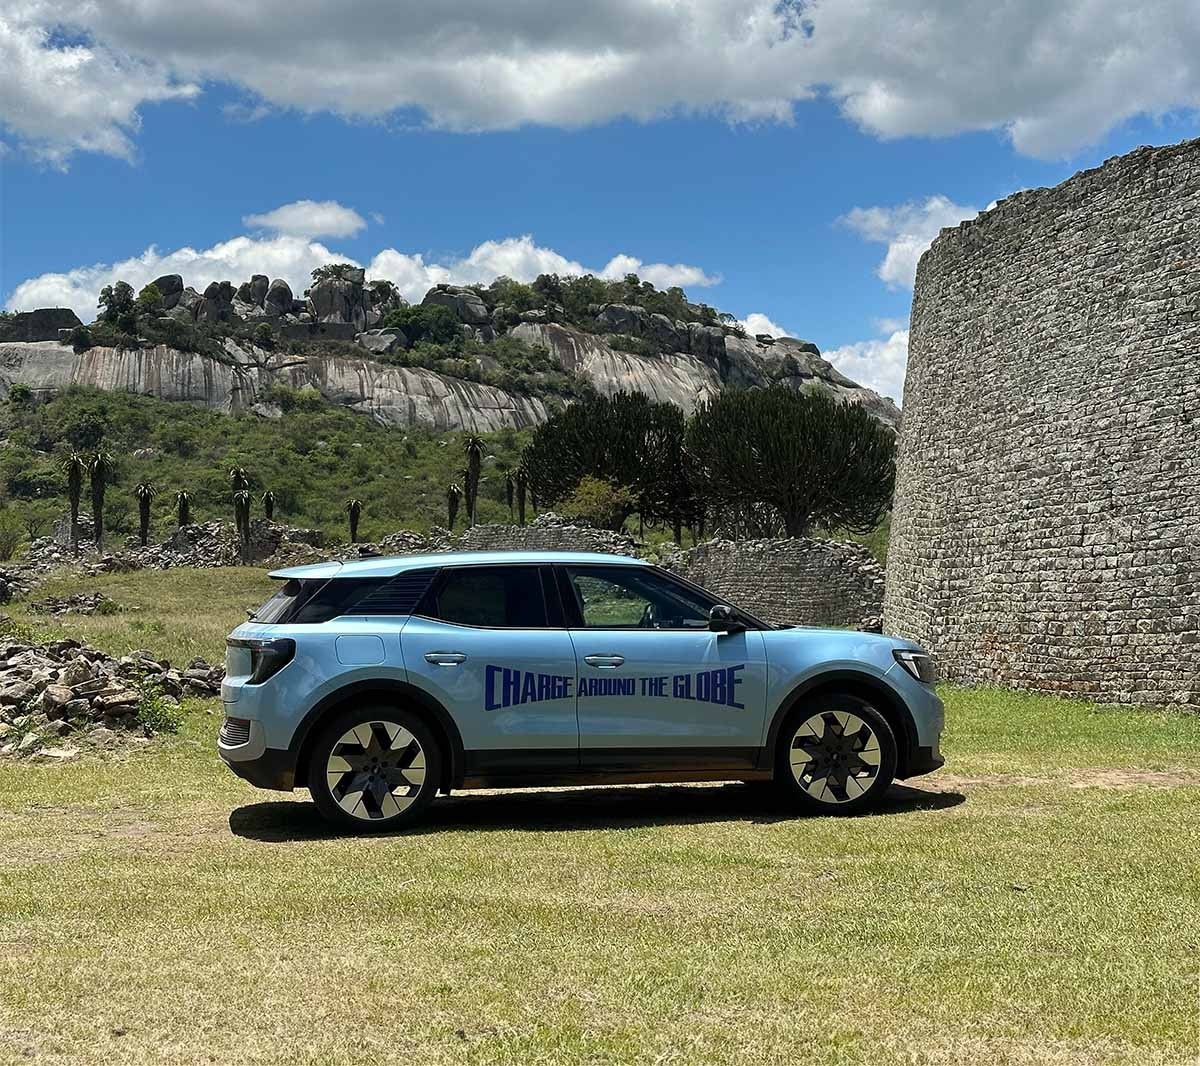 The Ford Explorer stands tall amongst the ruins